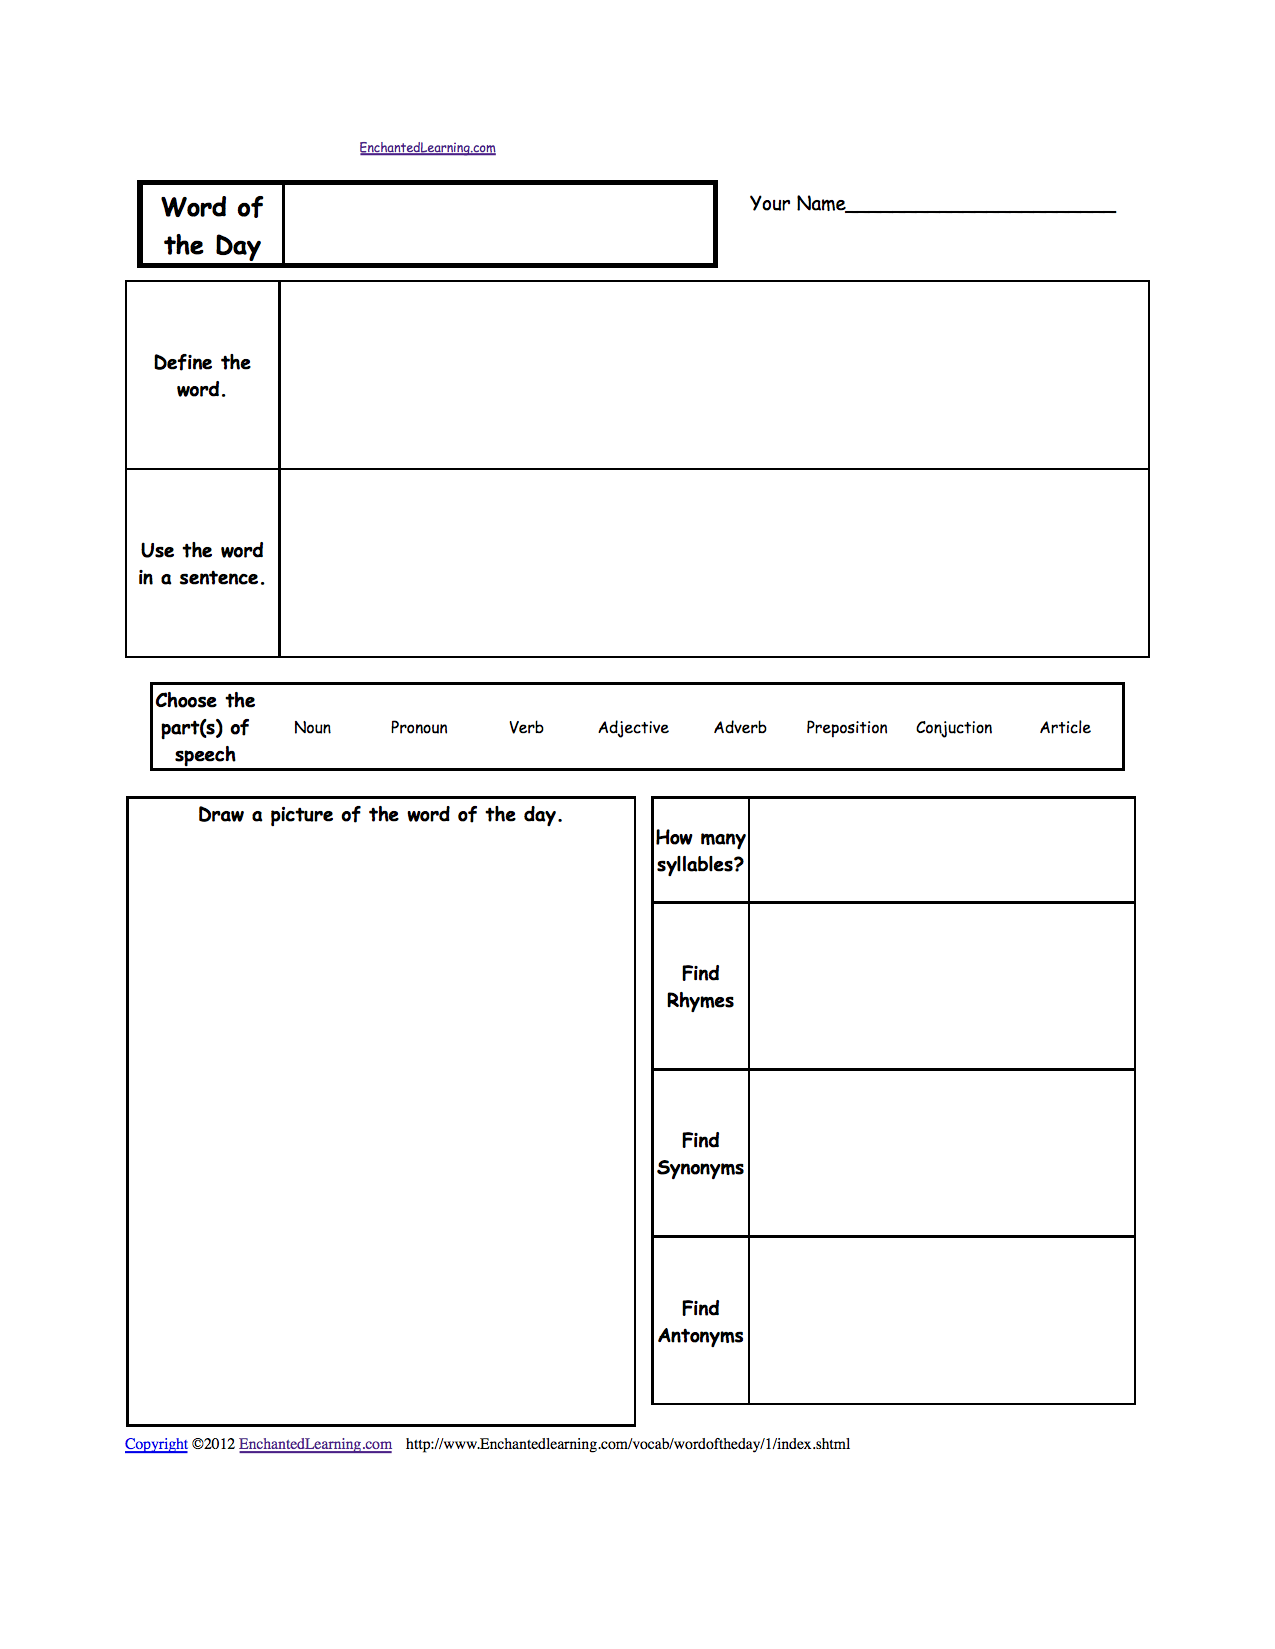 Word of the Day Worksheets - EnchantedLearning.com With Regard To Vocabulary Words Worksheet Template